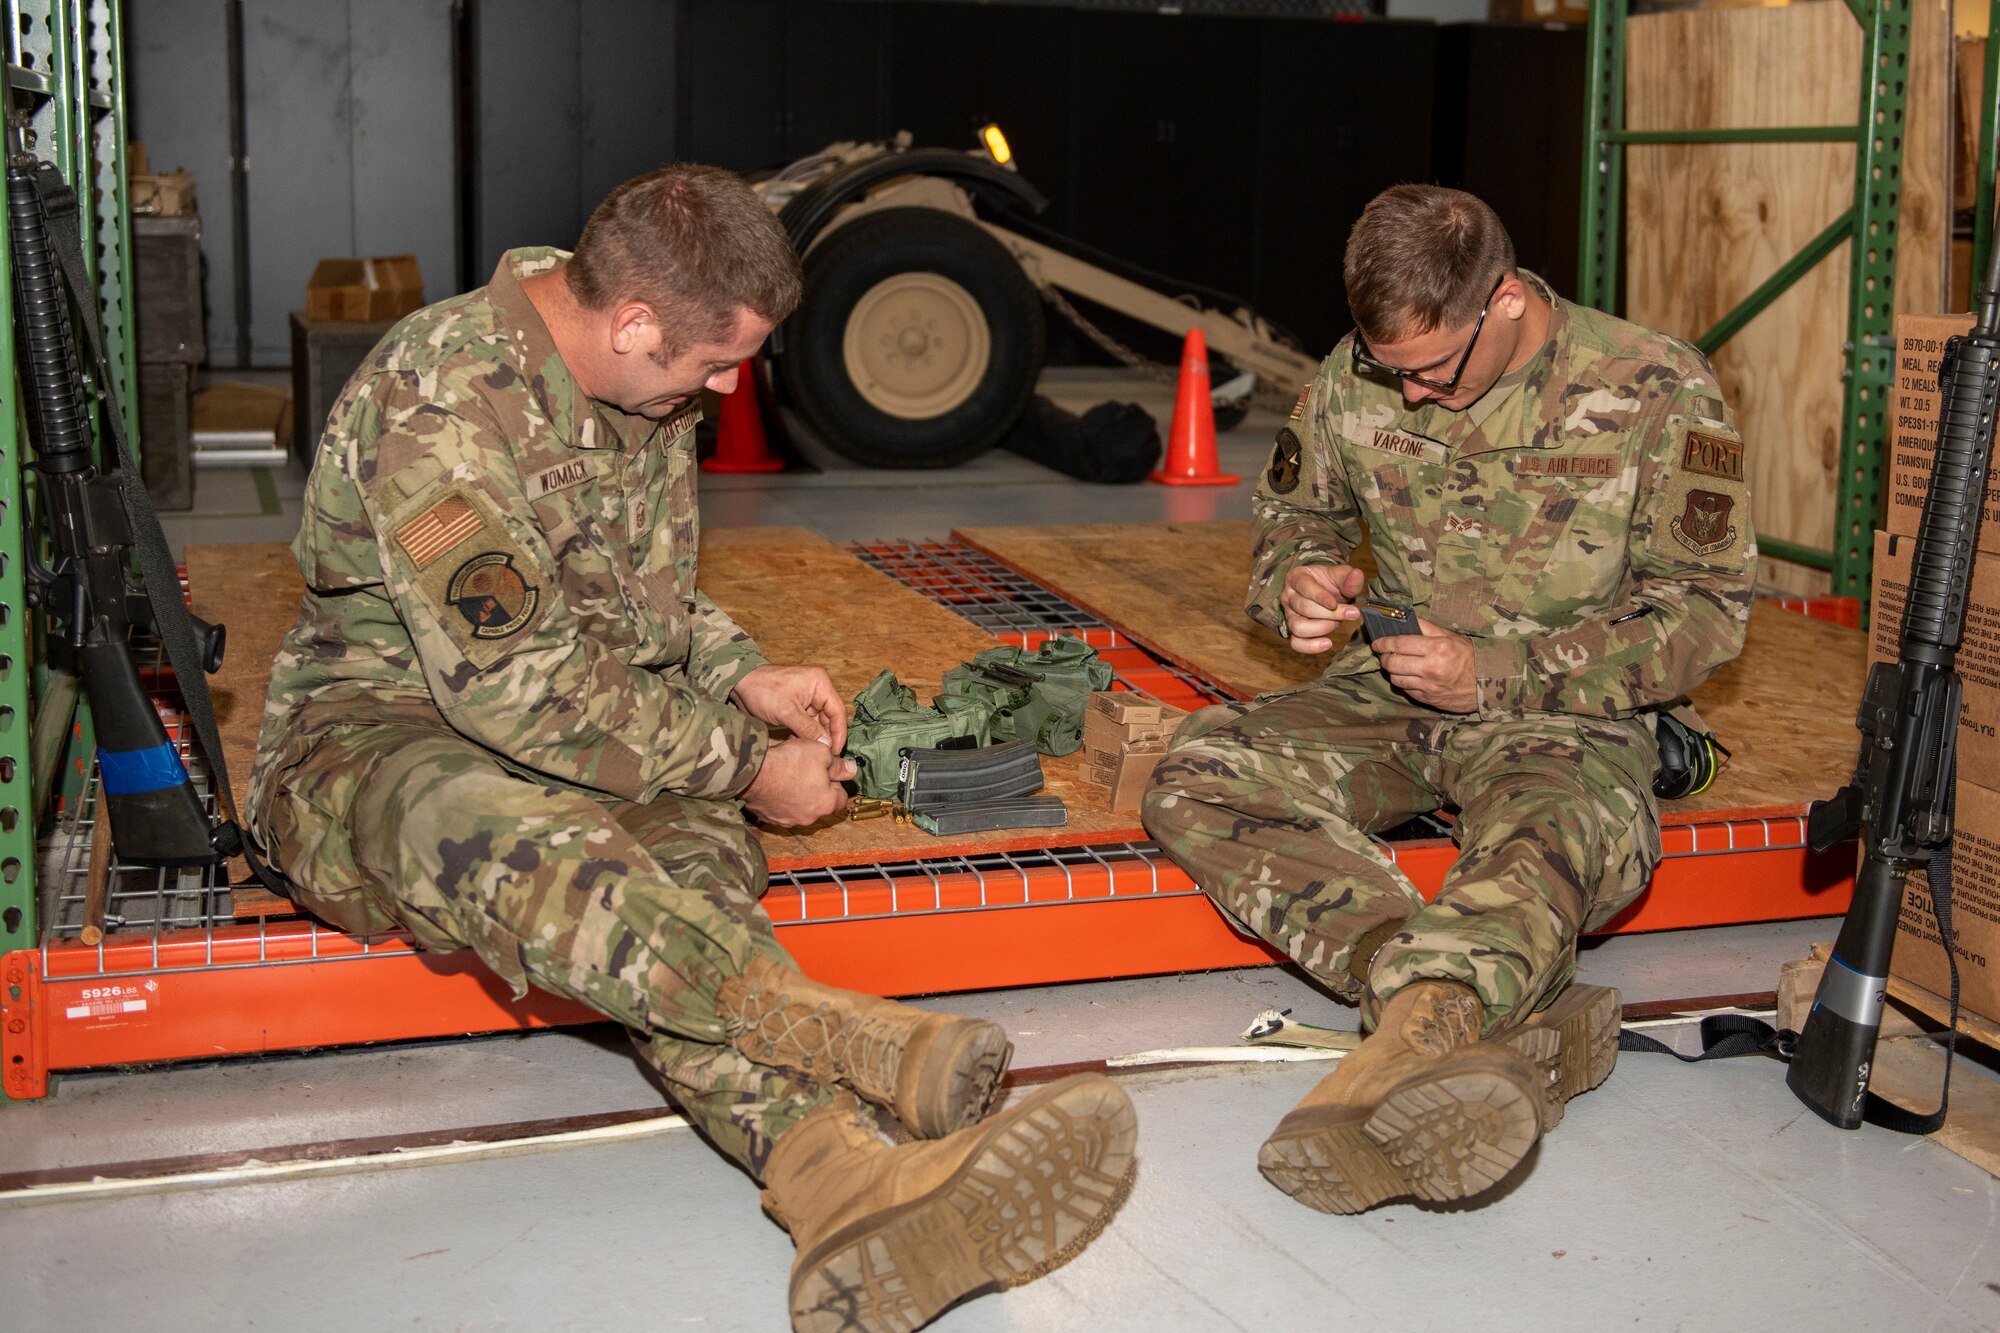 U.S. Air Force Master Sgt. Forrest Womack and Senior Airman Charles Varone, both 71st Aerial Port Squadron aerial porters, Joint Base Langley-Eustis, Va., load blank ammunition into magazines Aug. 14, 2022. The blanks were used in simulated live-fire exercises during a Joint Readiness Training Center exercise at Fort Polk, La. JRTC scenarios allow complete integration of Air Force and other military services as well as host-nation and civilian role players. The exercises replicate many of the unique situations and challenges a unit may face including host-national officials and citizens, insurgents and terrorists, news media coverage, and non-governmental organizations. (U.S. Air Force photo by Senior Airman Ruben Rios)